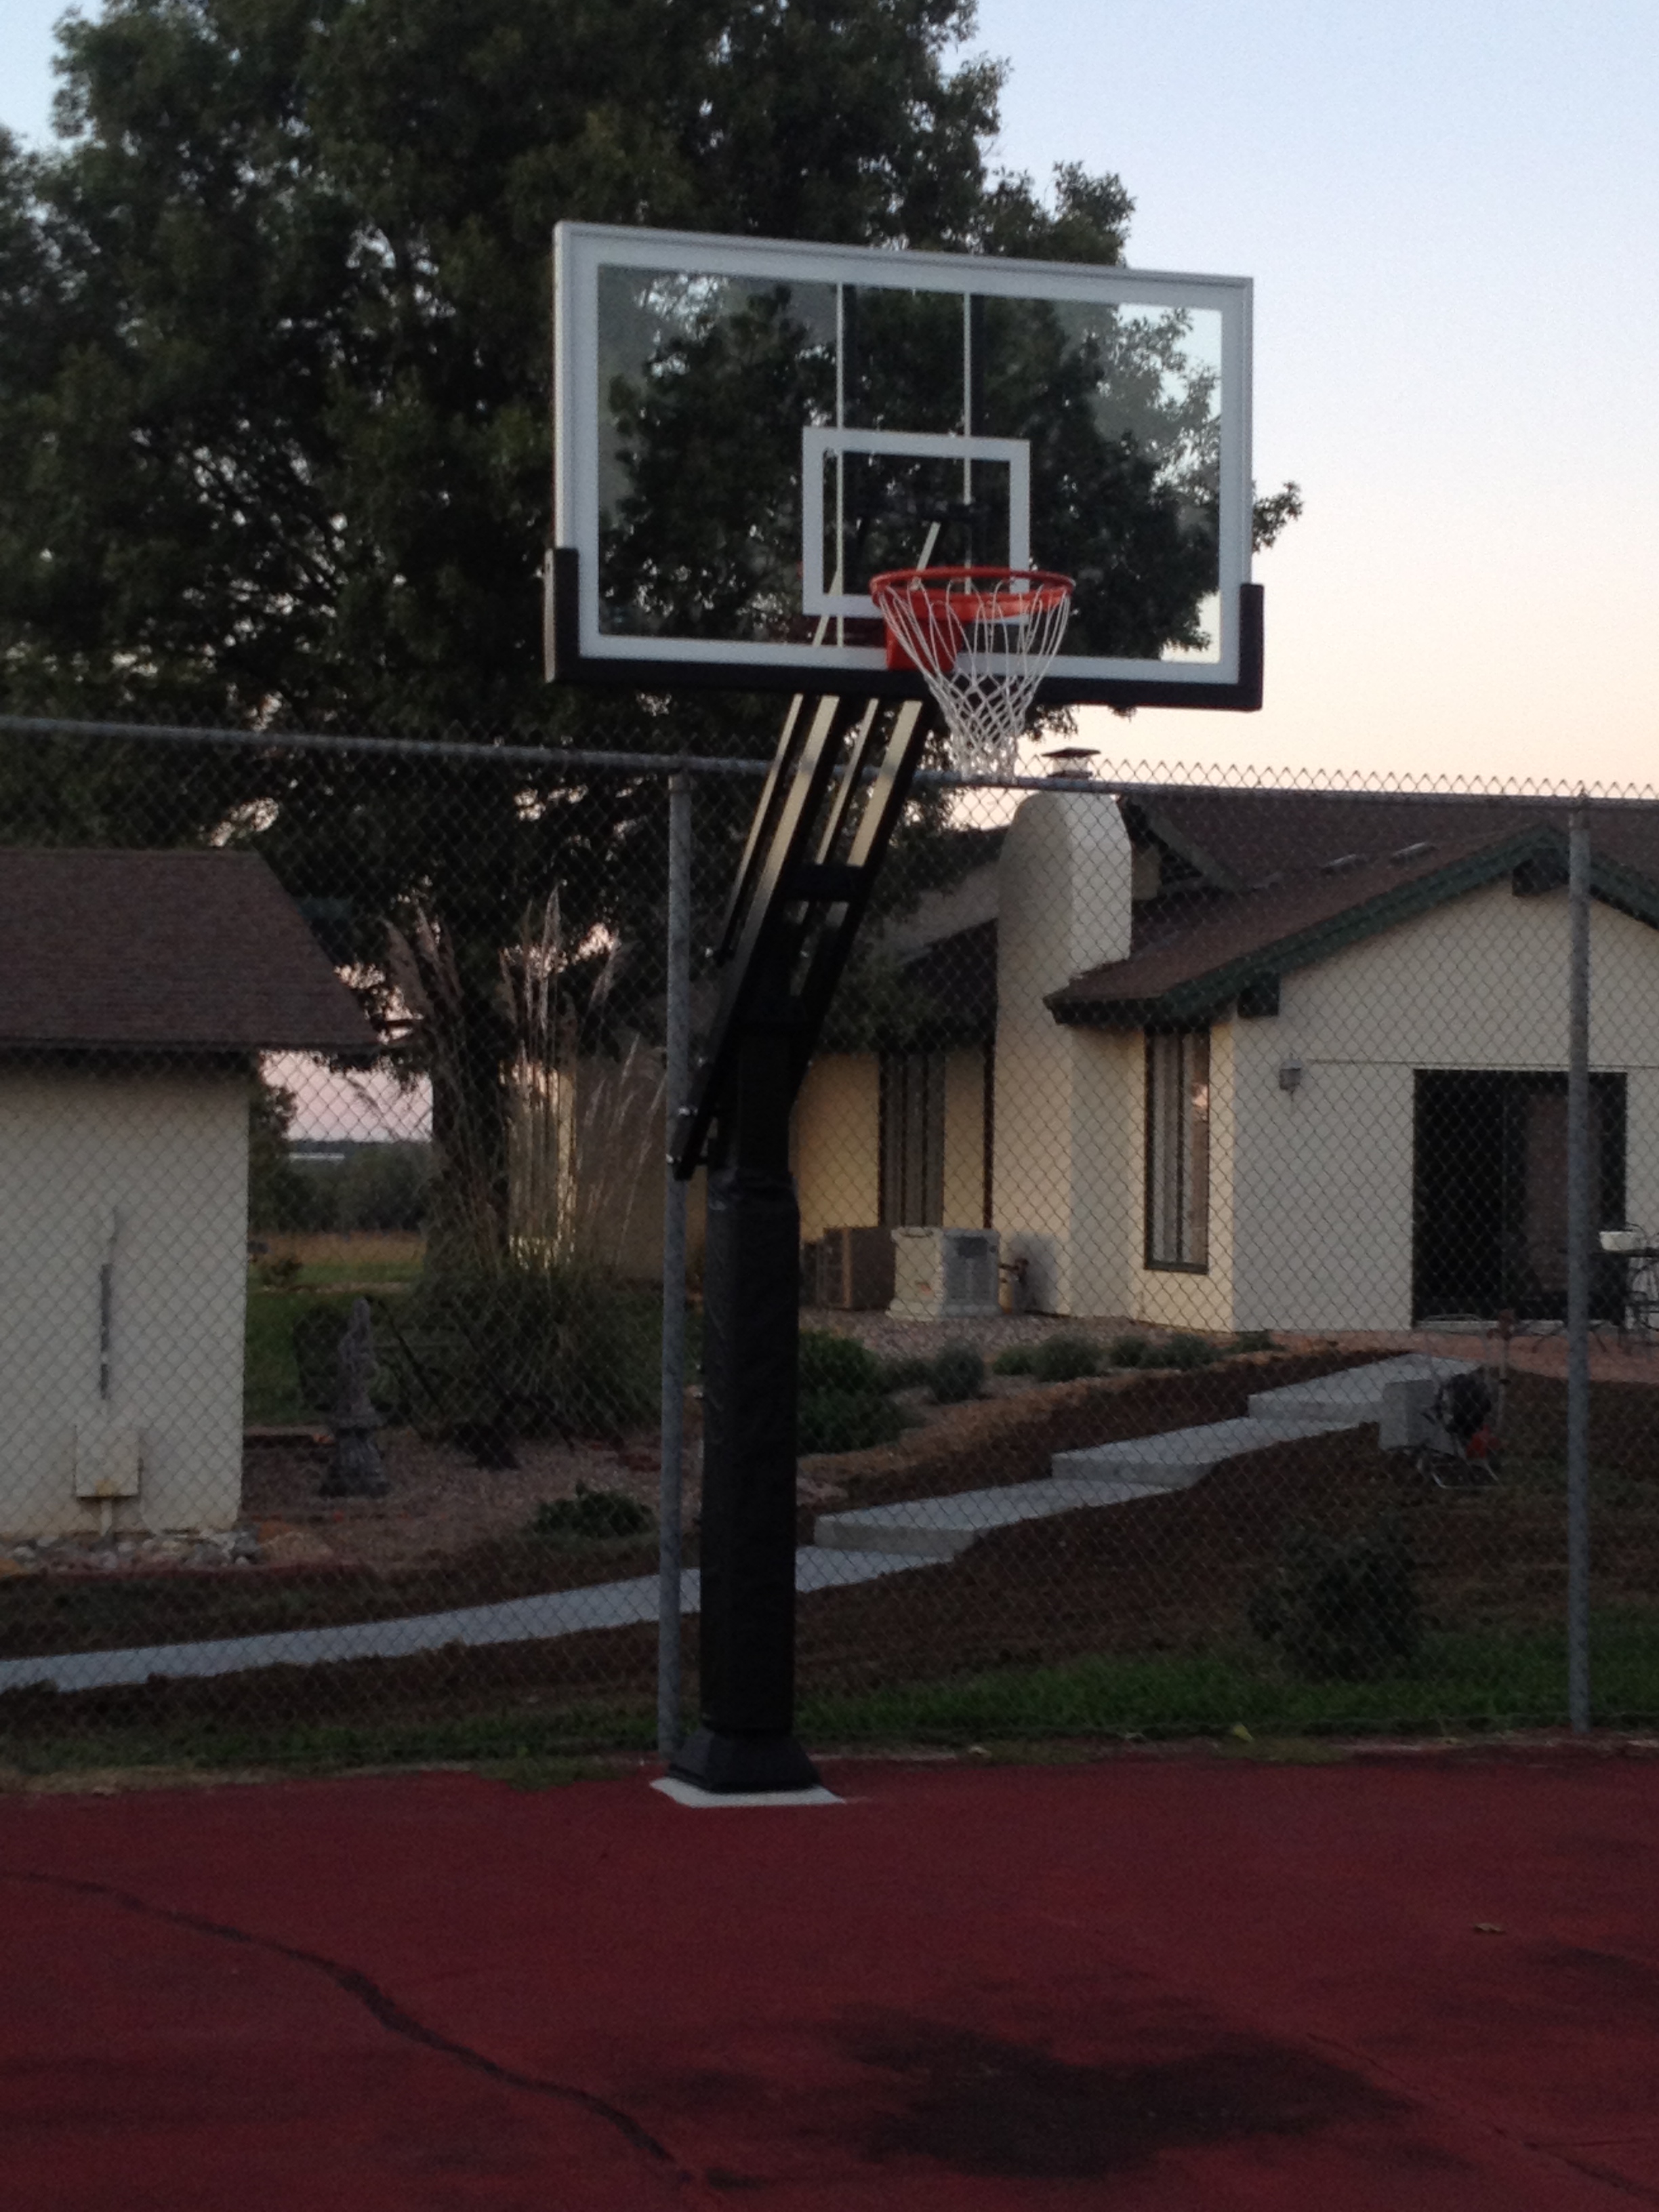 This front shot shows the Pro Dunk Platinum Basketball system installed at the end of this old tennis court. 